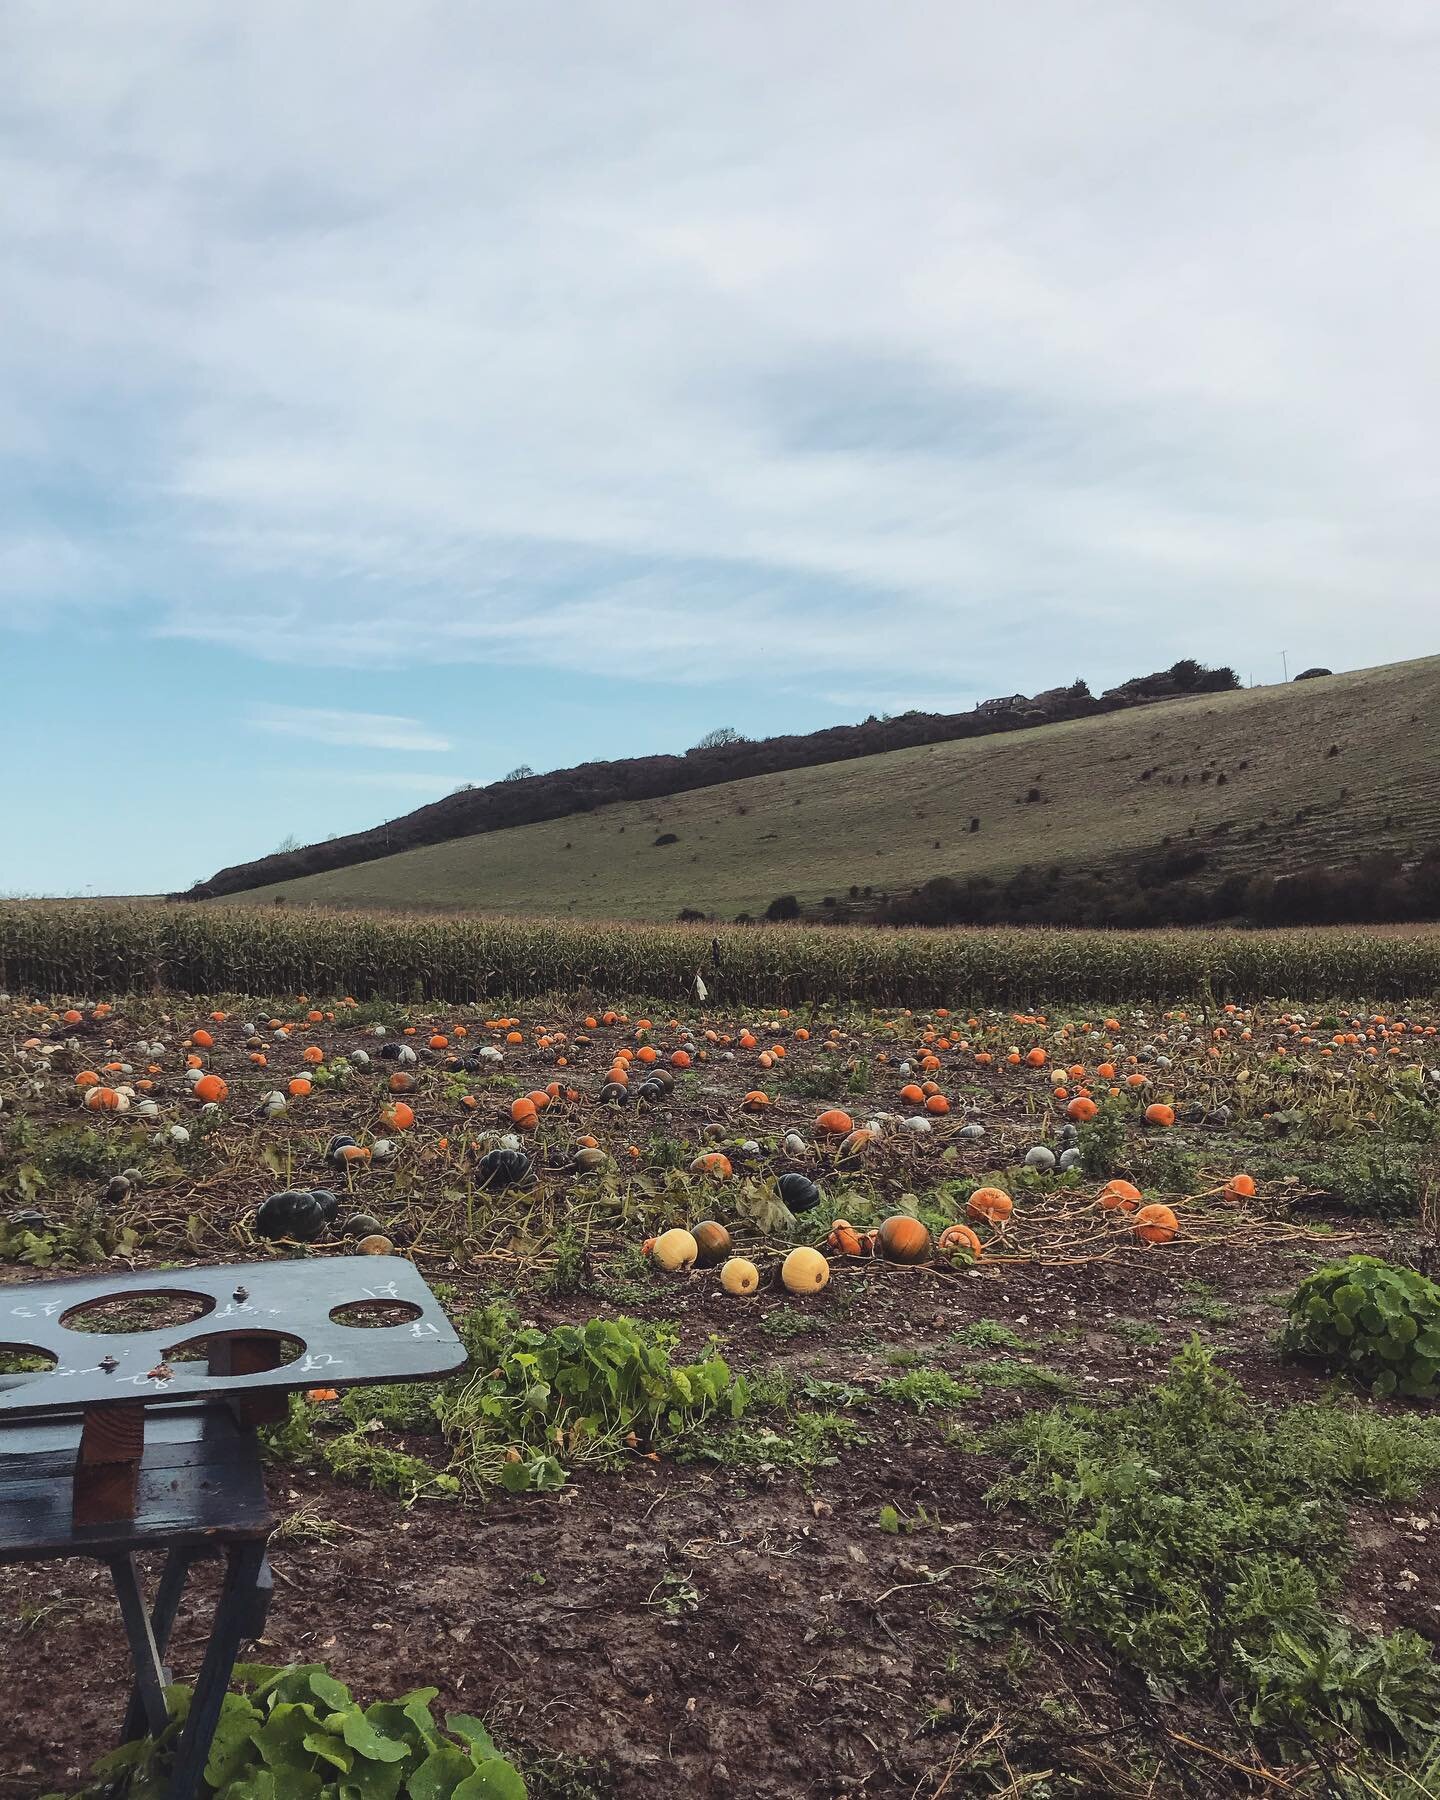 🎃🎃🎃🎃1 more day until Halloween! Lots of pumpkins still to pick from. We are open 10am-4pm today and tomorrow 🎃🎃🎃🎃 #pumpkinpatch #pumpkins #halloween #field #farm #southdowns #southdownsway